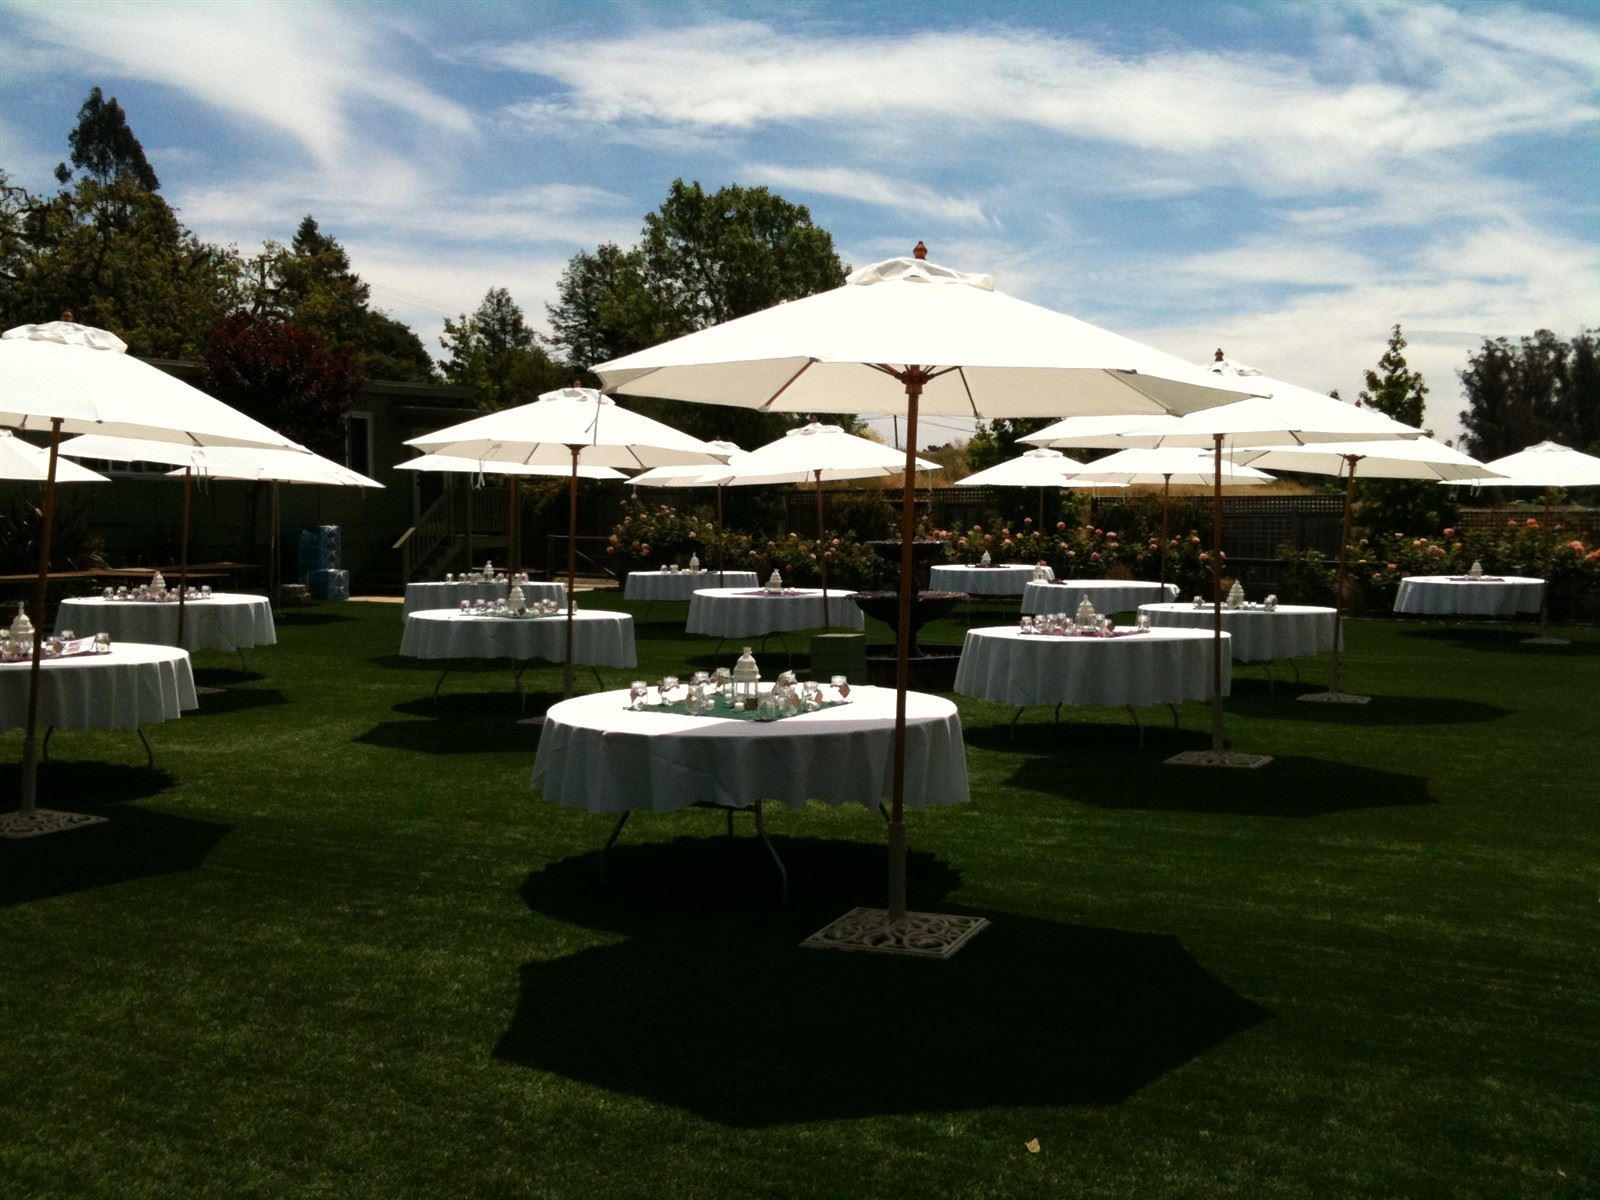 Sova Gardens Wedding - Runaway DJ and Events : The clouds provided a beautiful backdrop for the dinners.